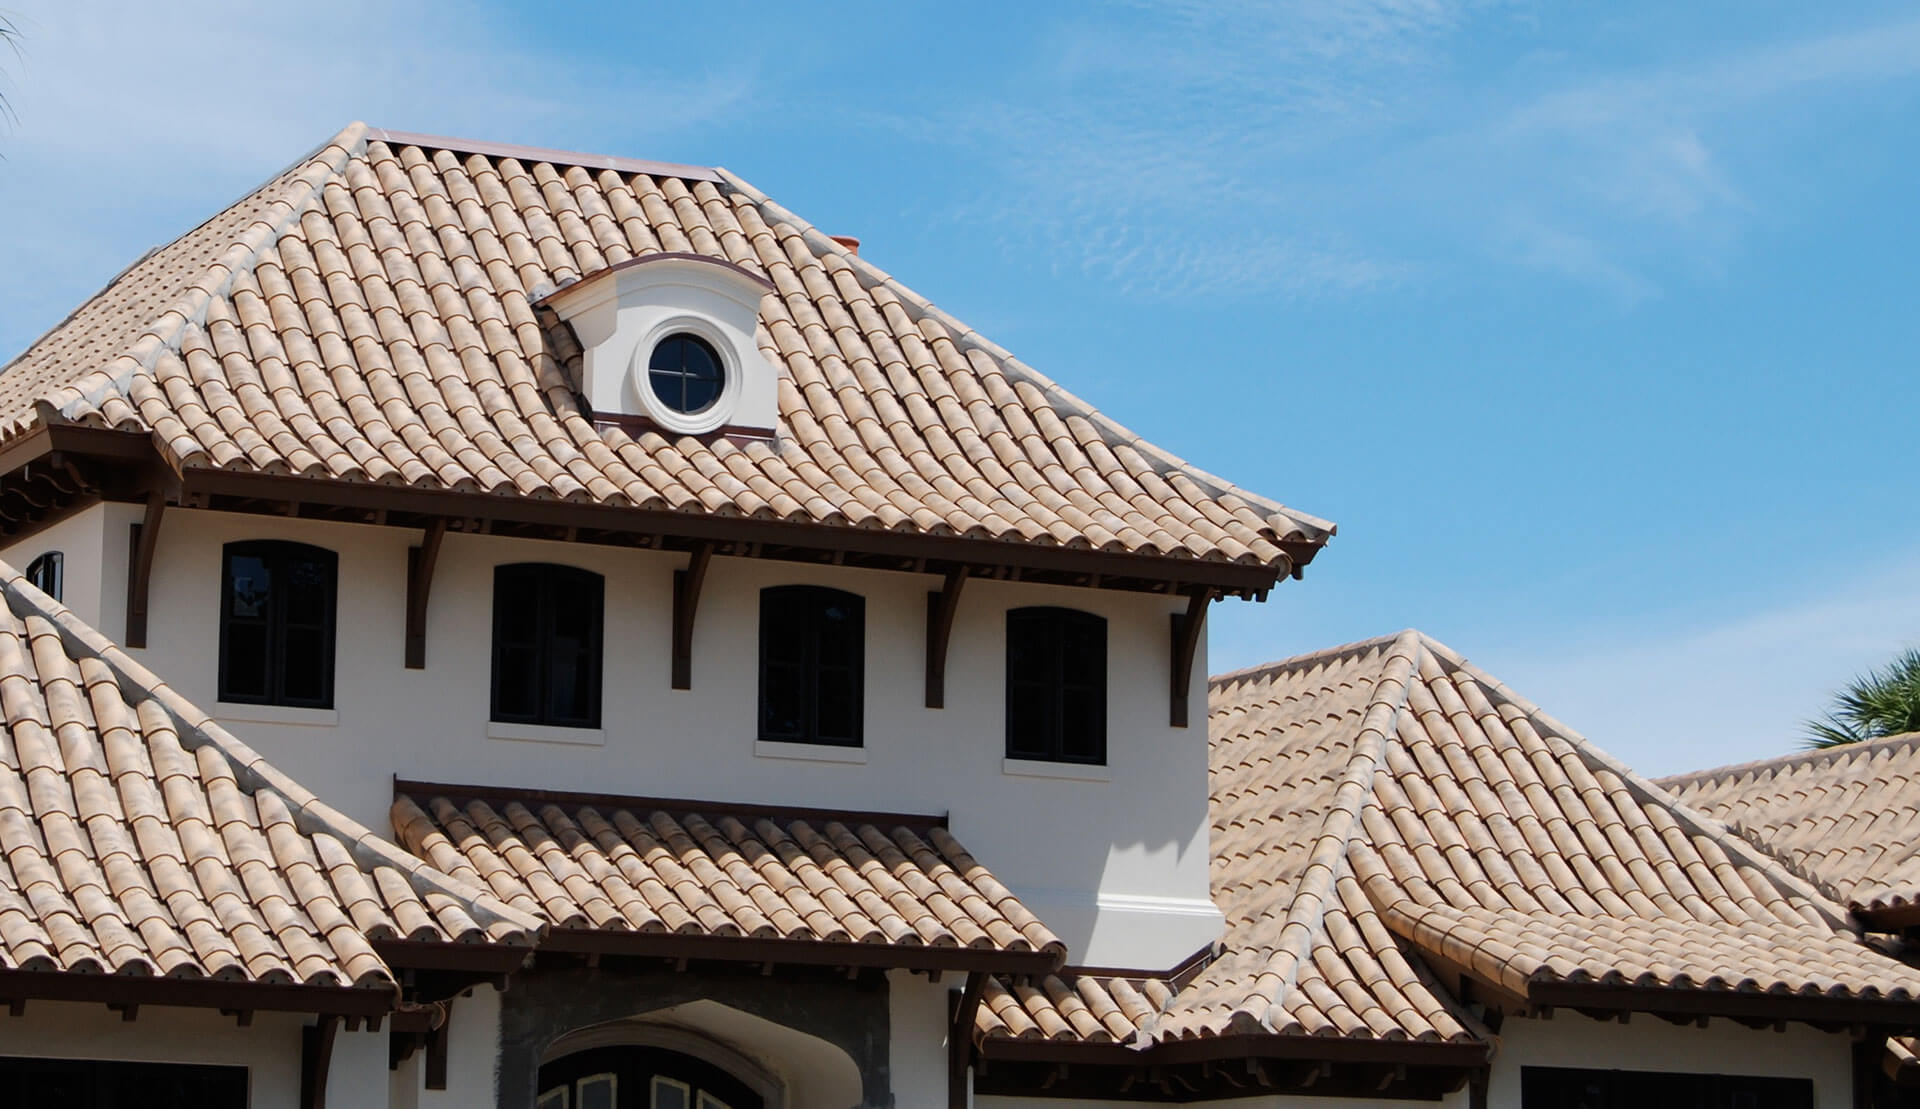 Vero Beach Roofing, Inc. - Commercial Roofing Services, Florida Roofing Contractor